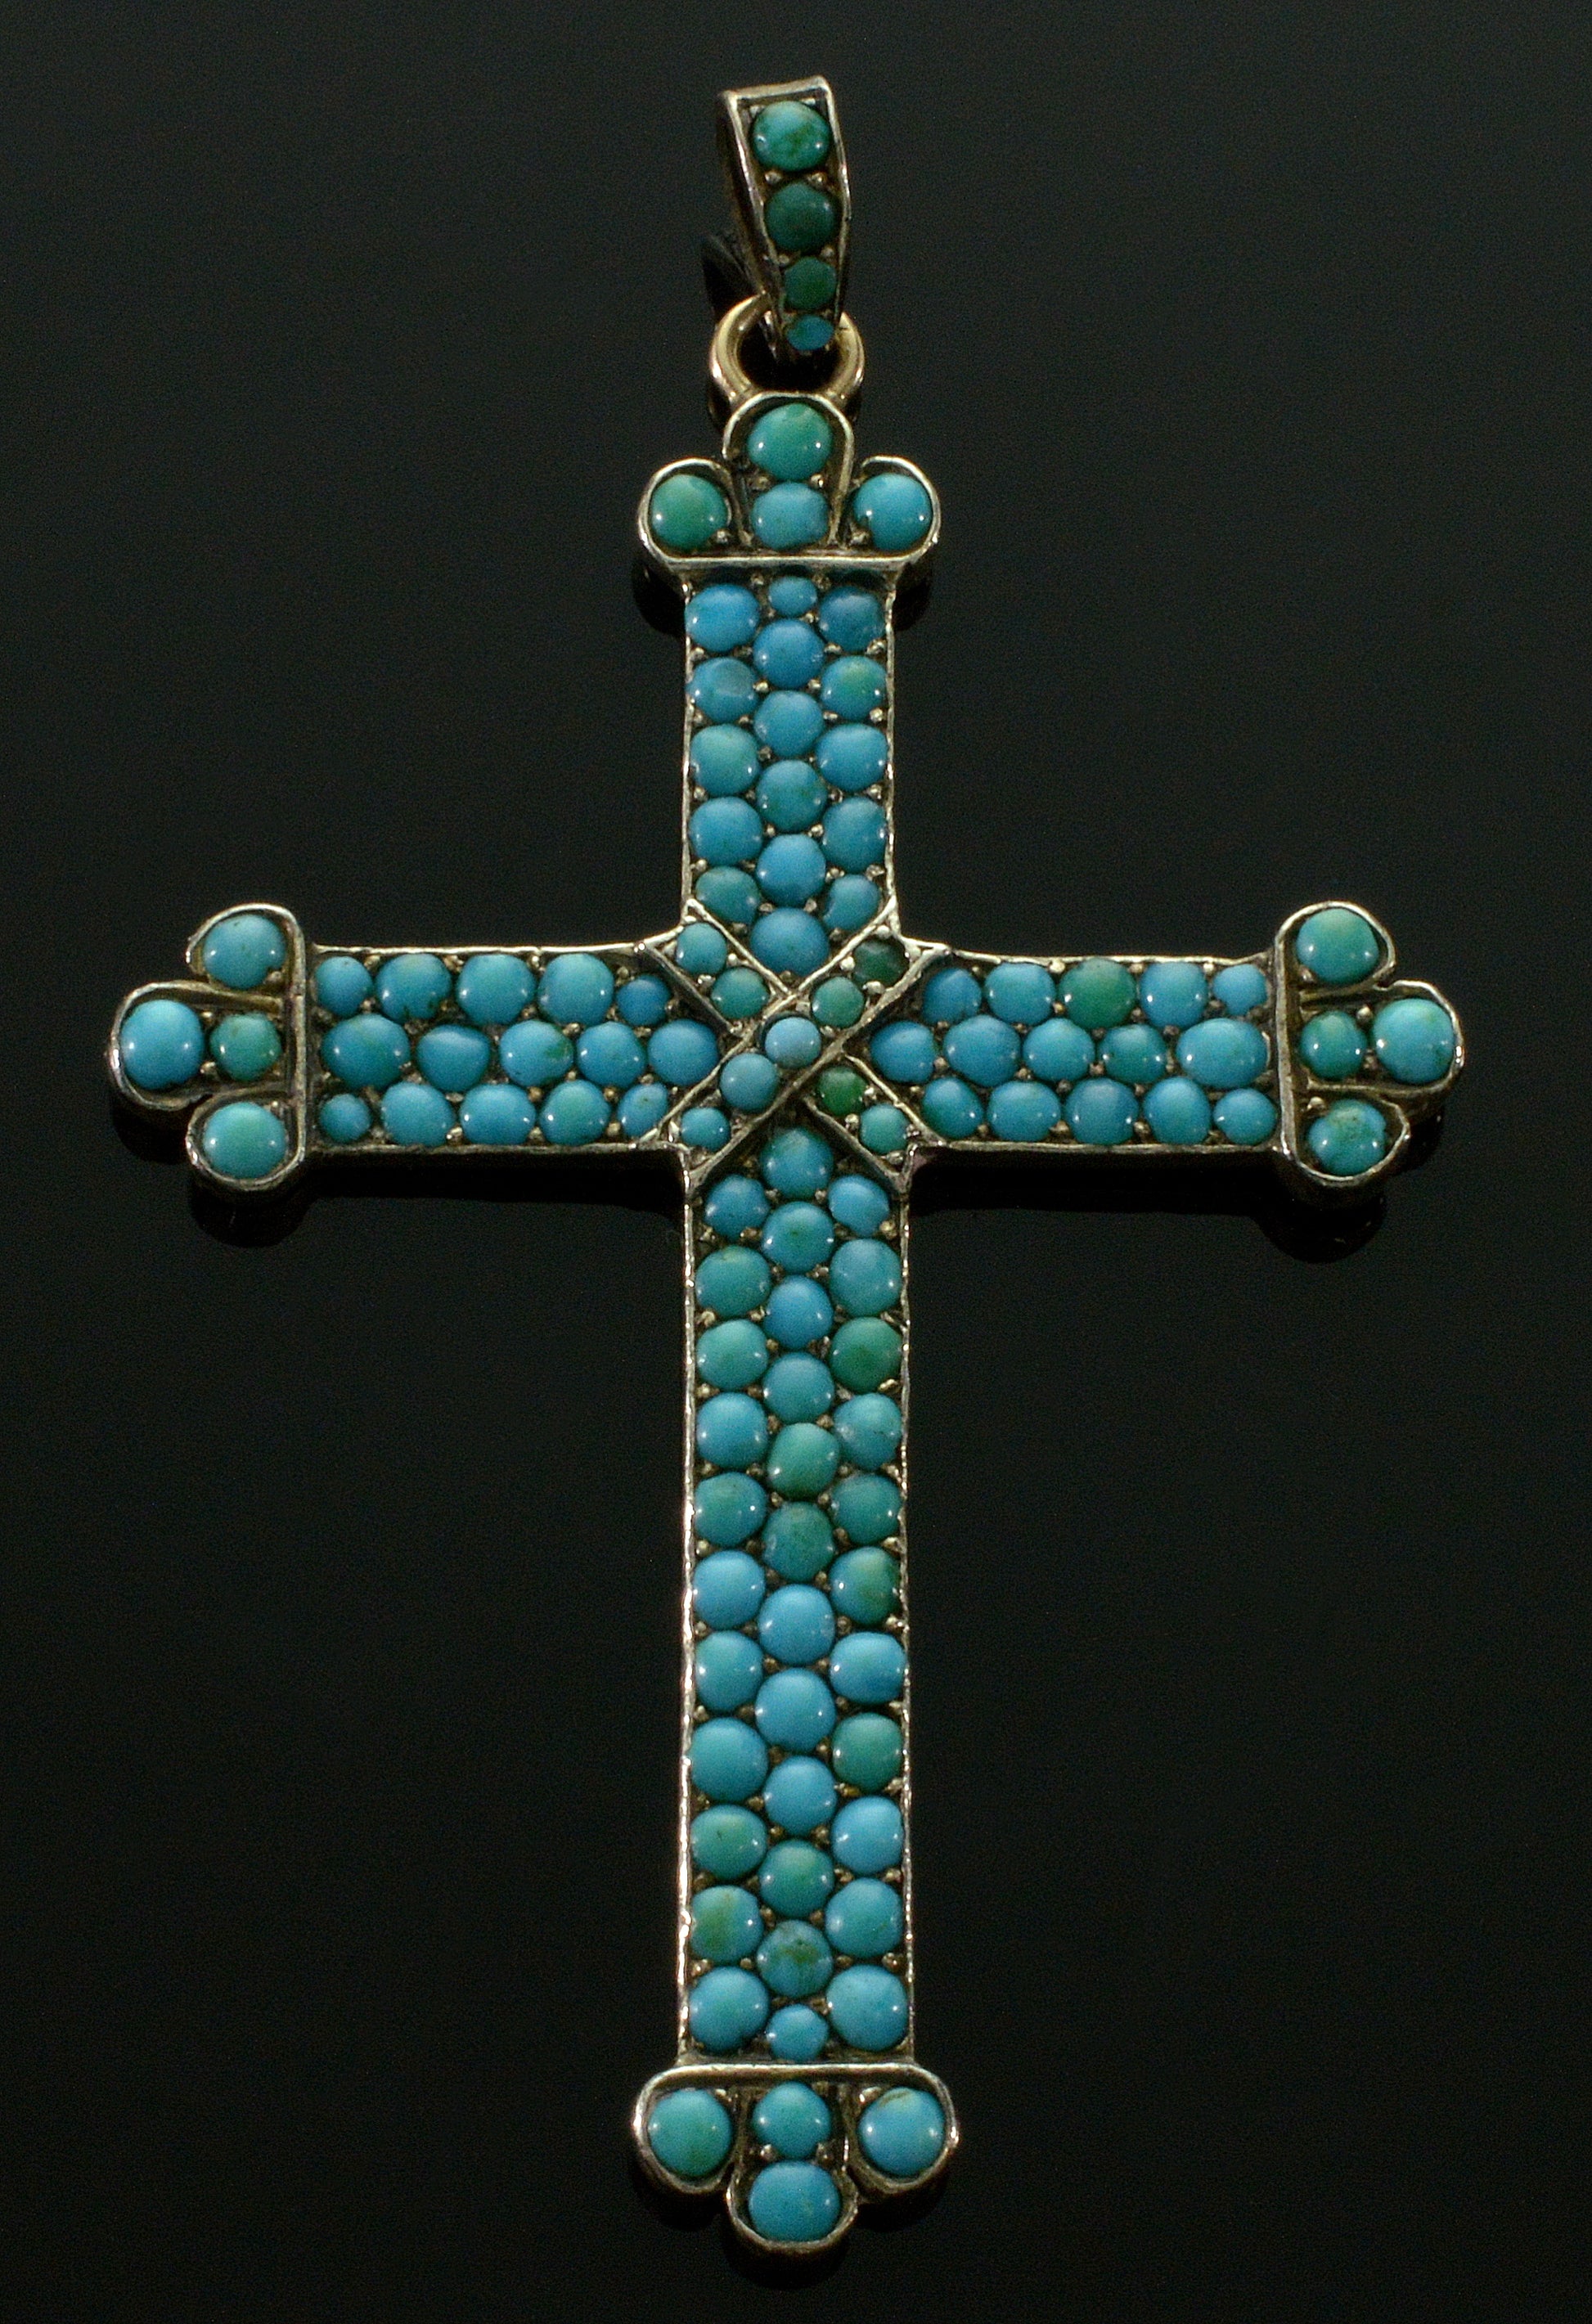 Antique Victorian 9K Gold Turquoise Cross Pendant C.1880 Pave Turquoise Carved Roses